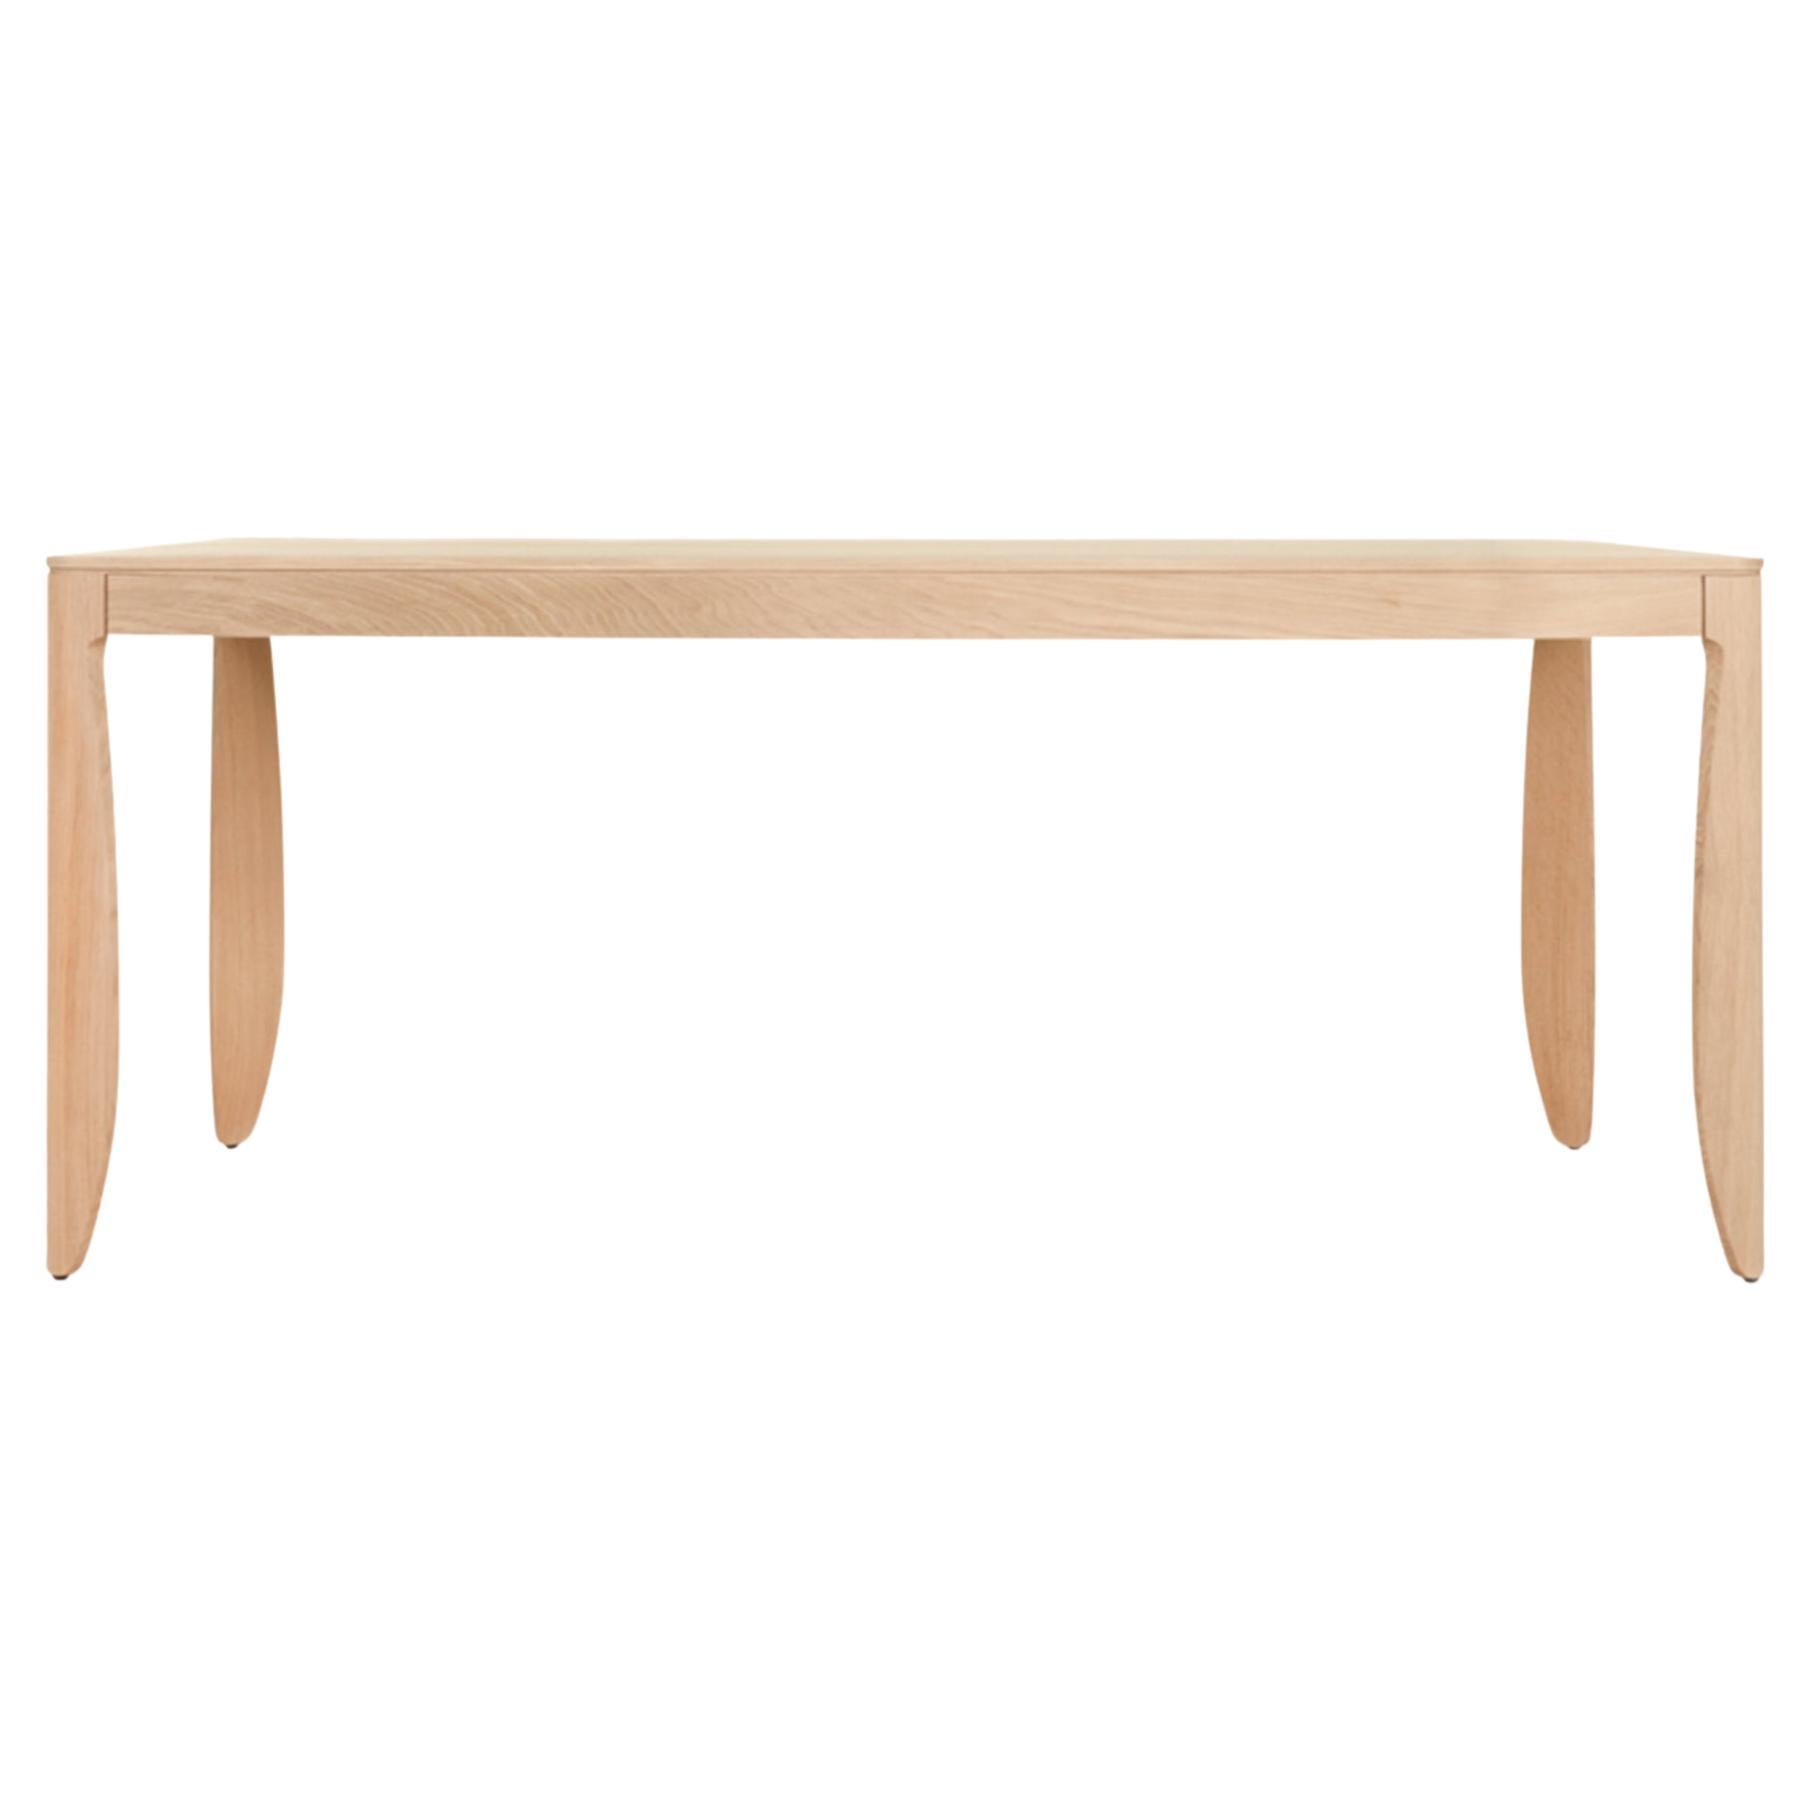 Moooi Monster Small Table White Wash Stained Oak by Marcel Wanders Studio